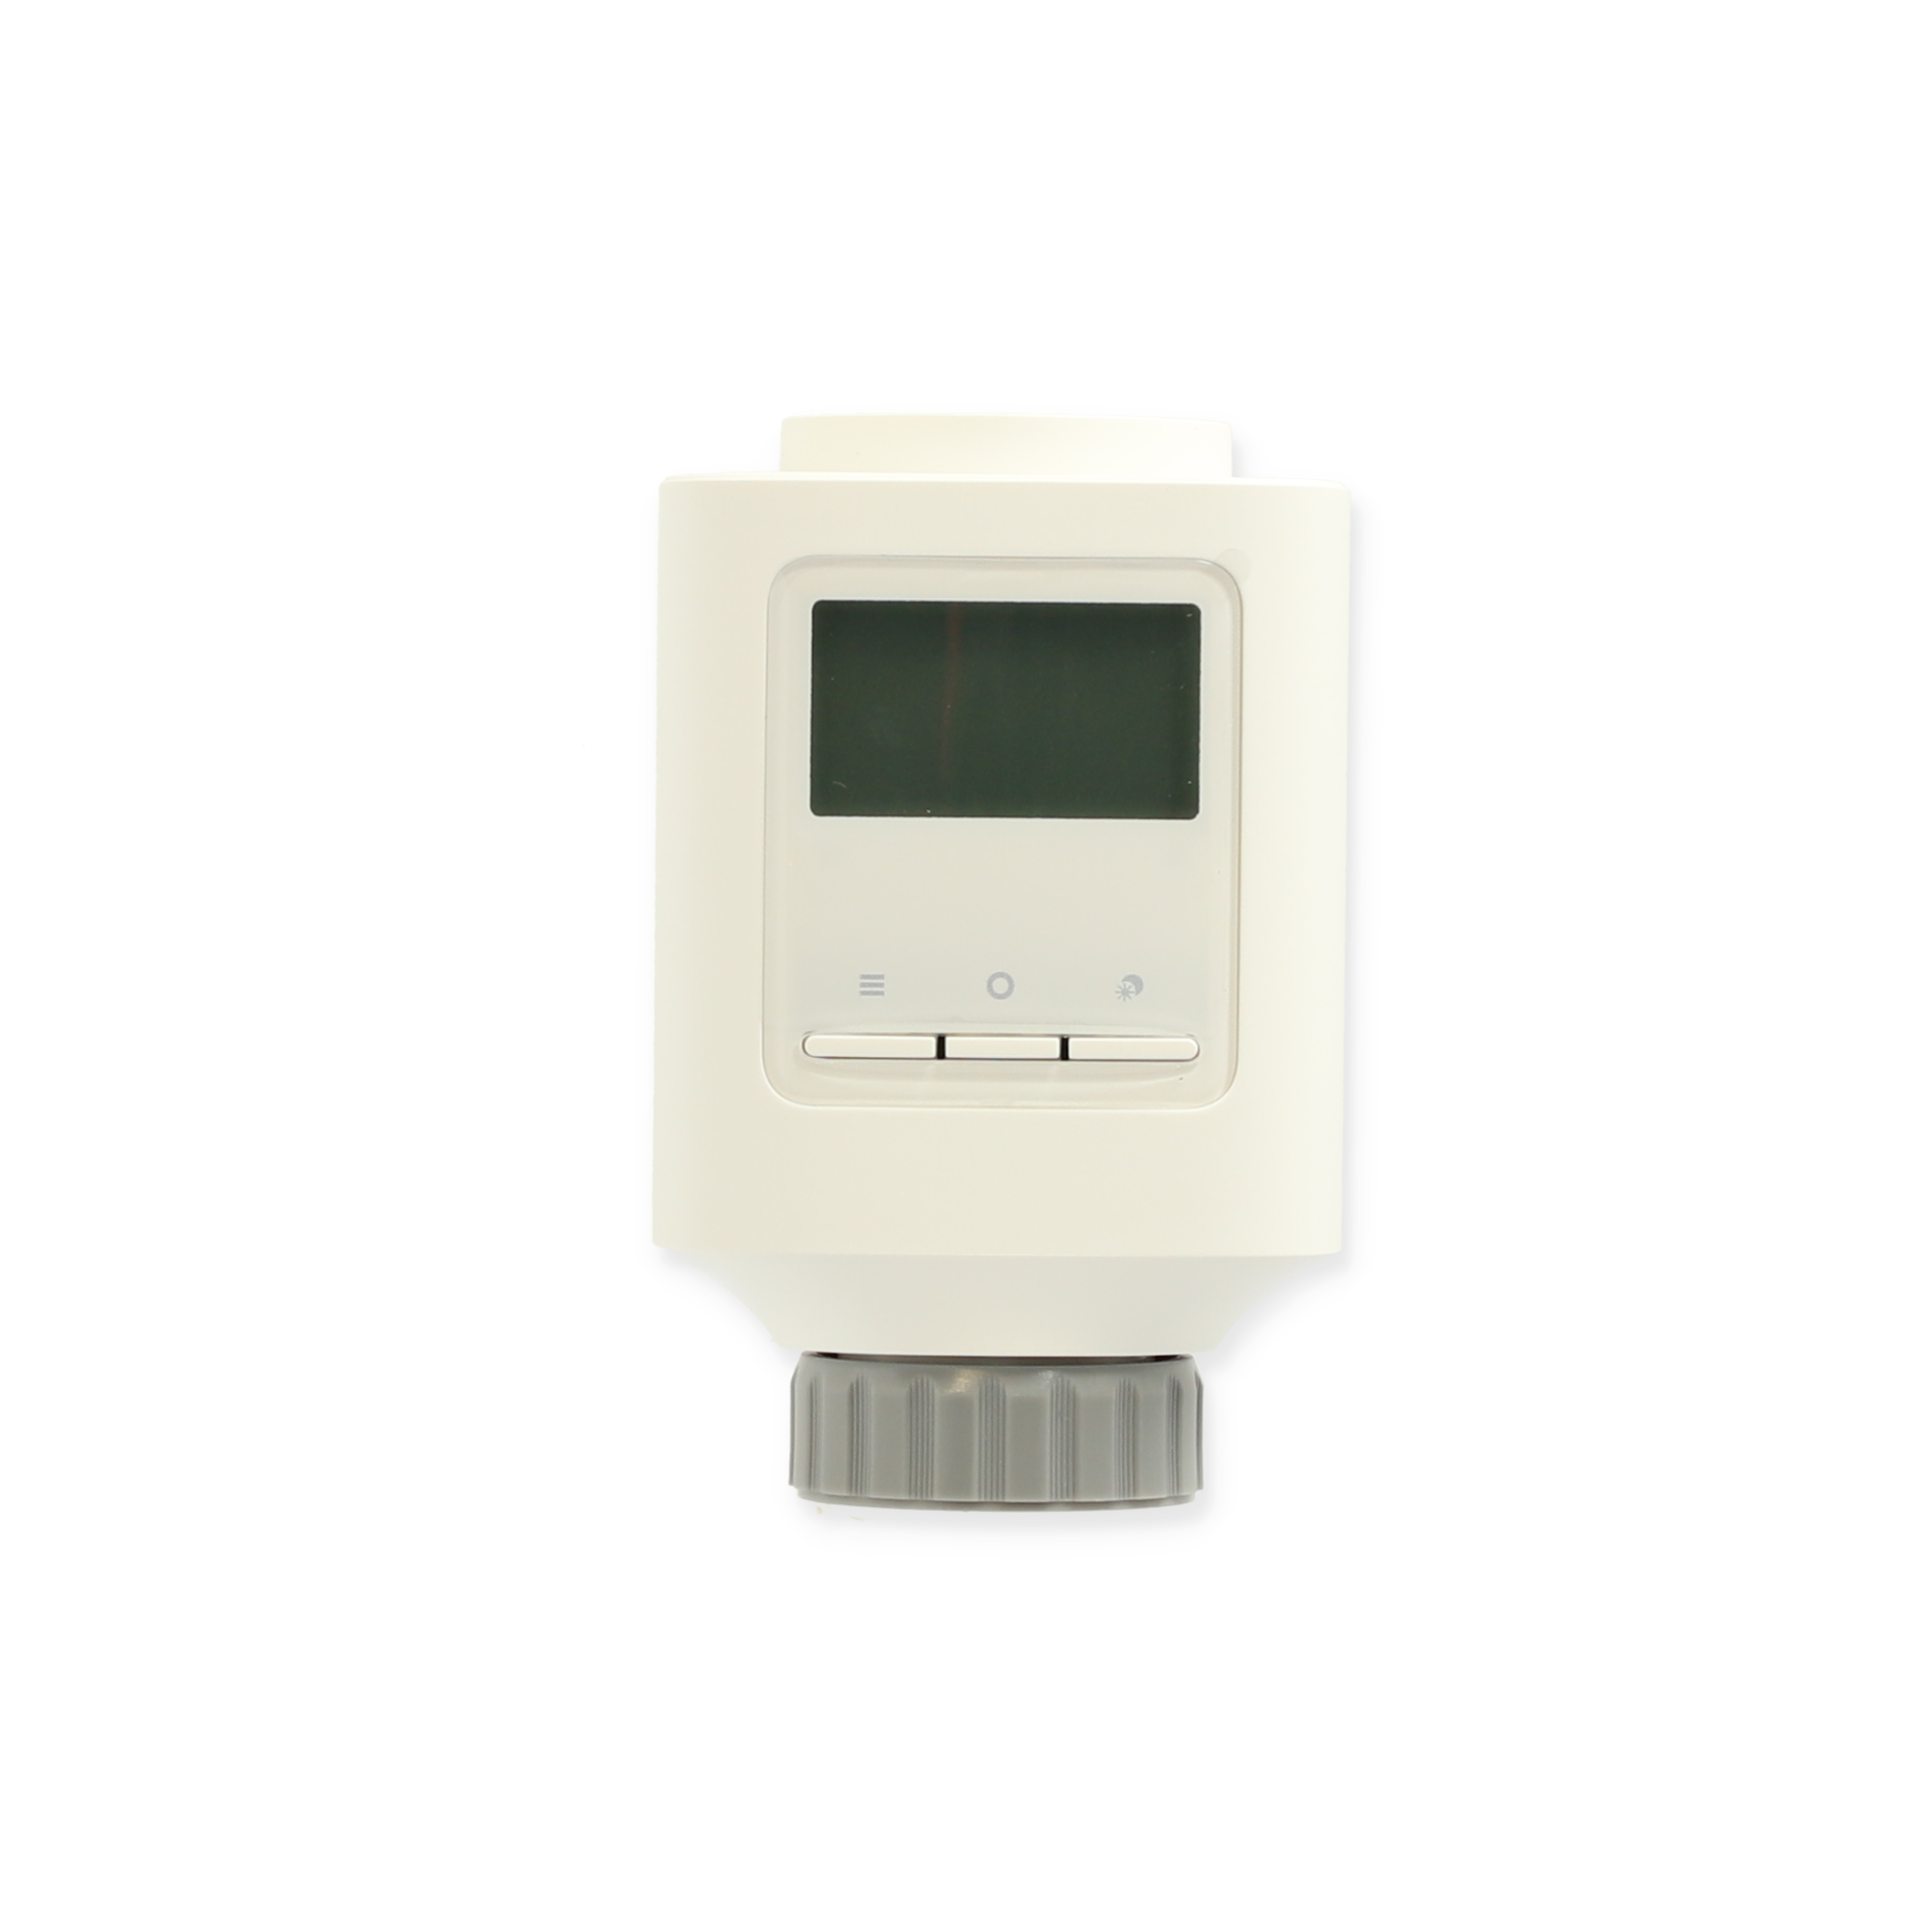 Heizkörperthermostat 'SH-3' + product picture